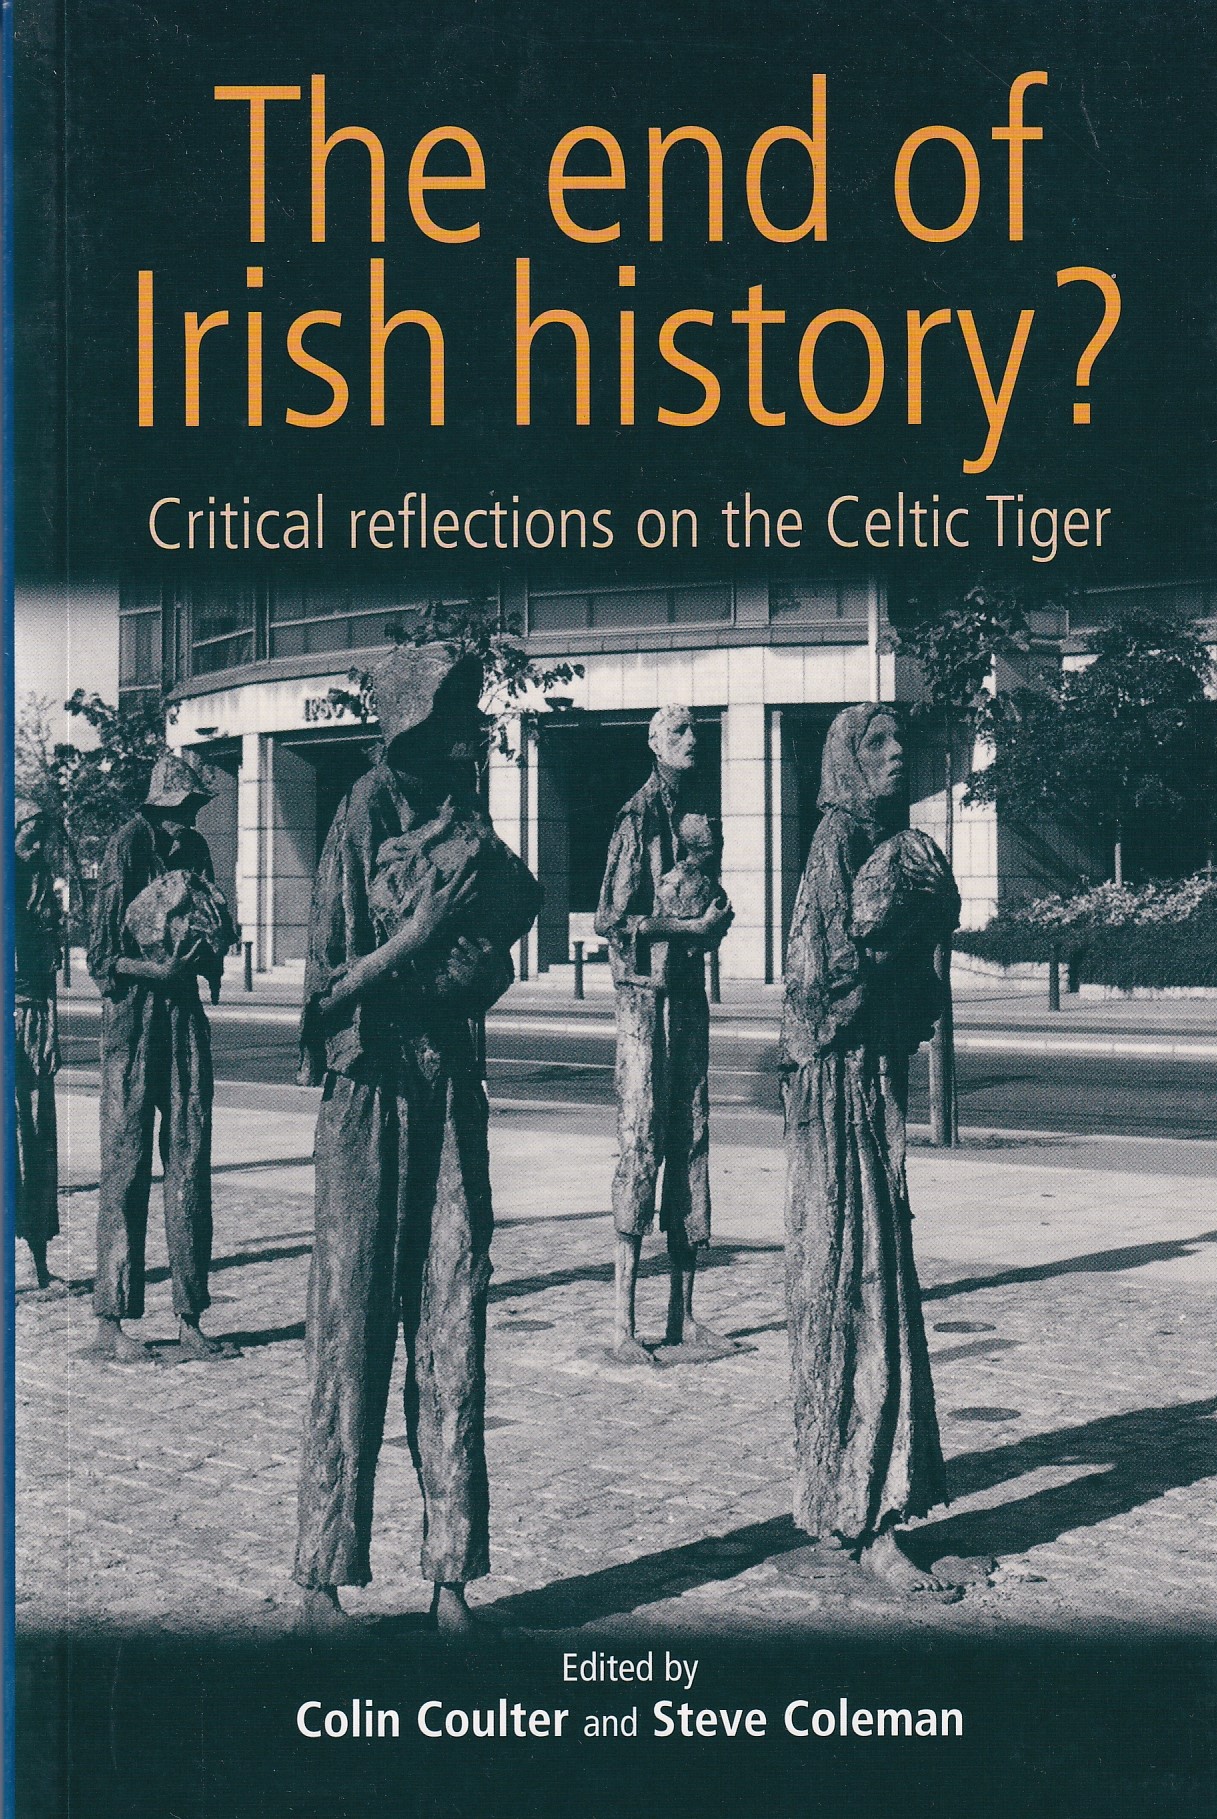 The end of Irish history?: Reflections on the Celtic Tiger | Coulter, Colin; Coleman, Steve eds. | Charlie Byrne's